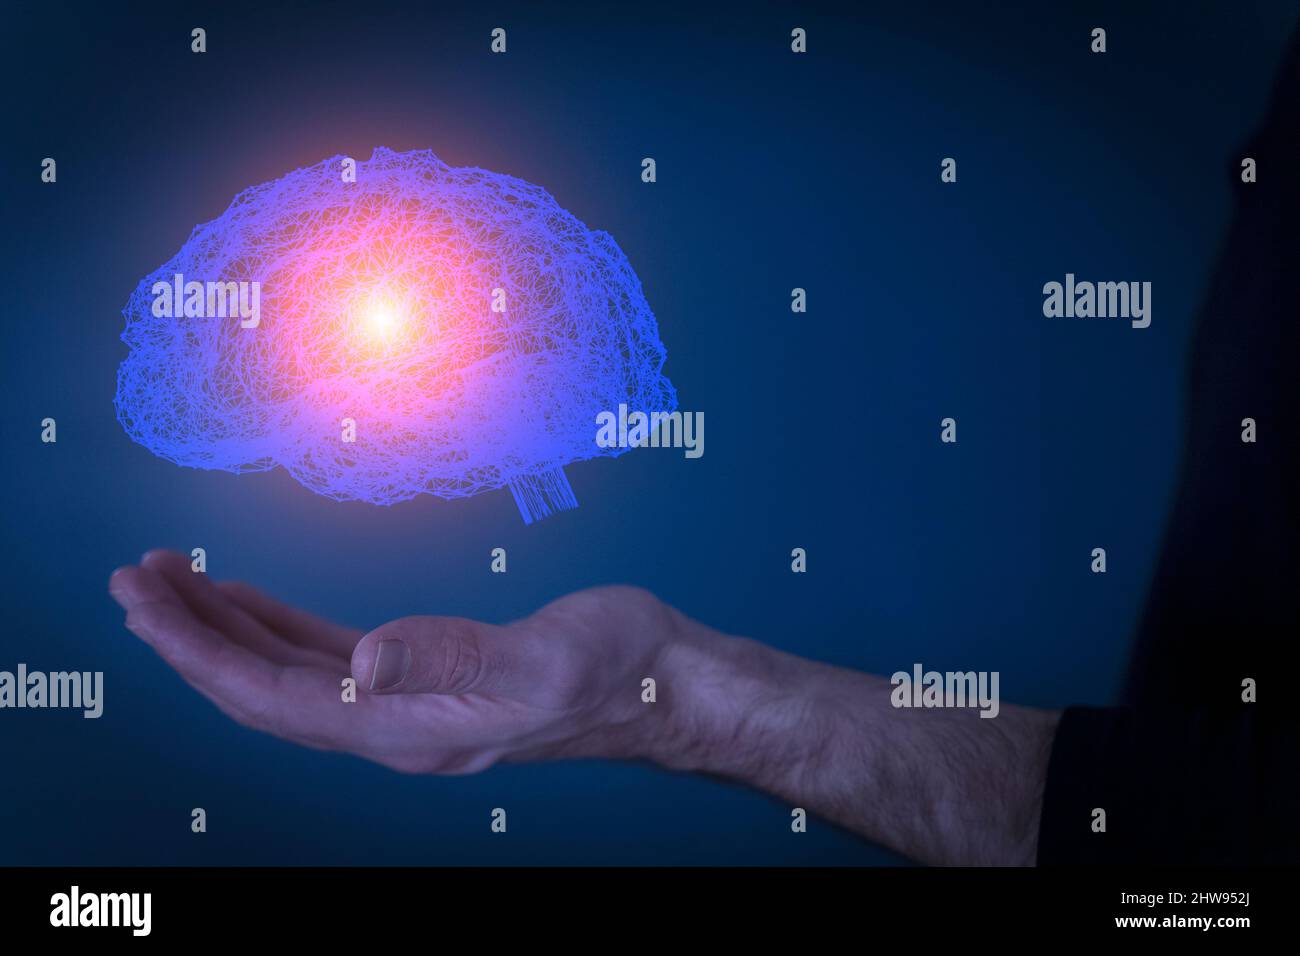 Brain hologram. Virtual 3D digital hologram of brain in the hands of a human scientist or user. Augmented reality, diagnostic technology, science of the future concept. High quality photo Stock Photo